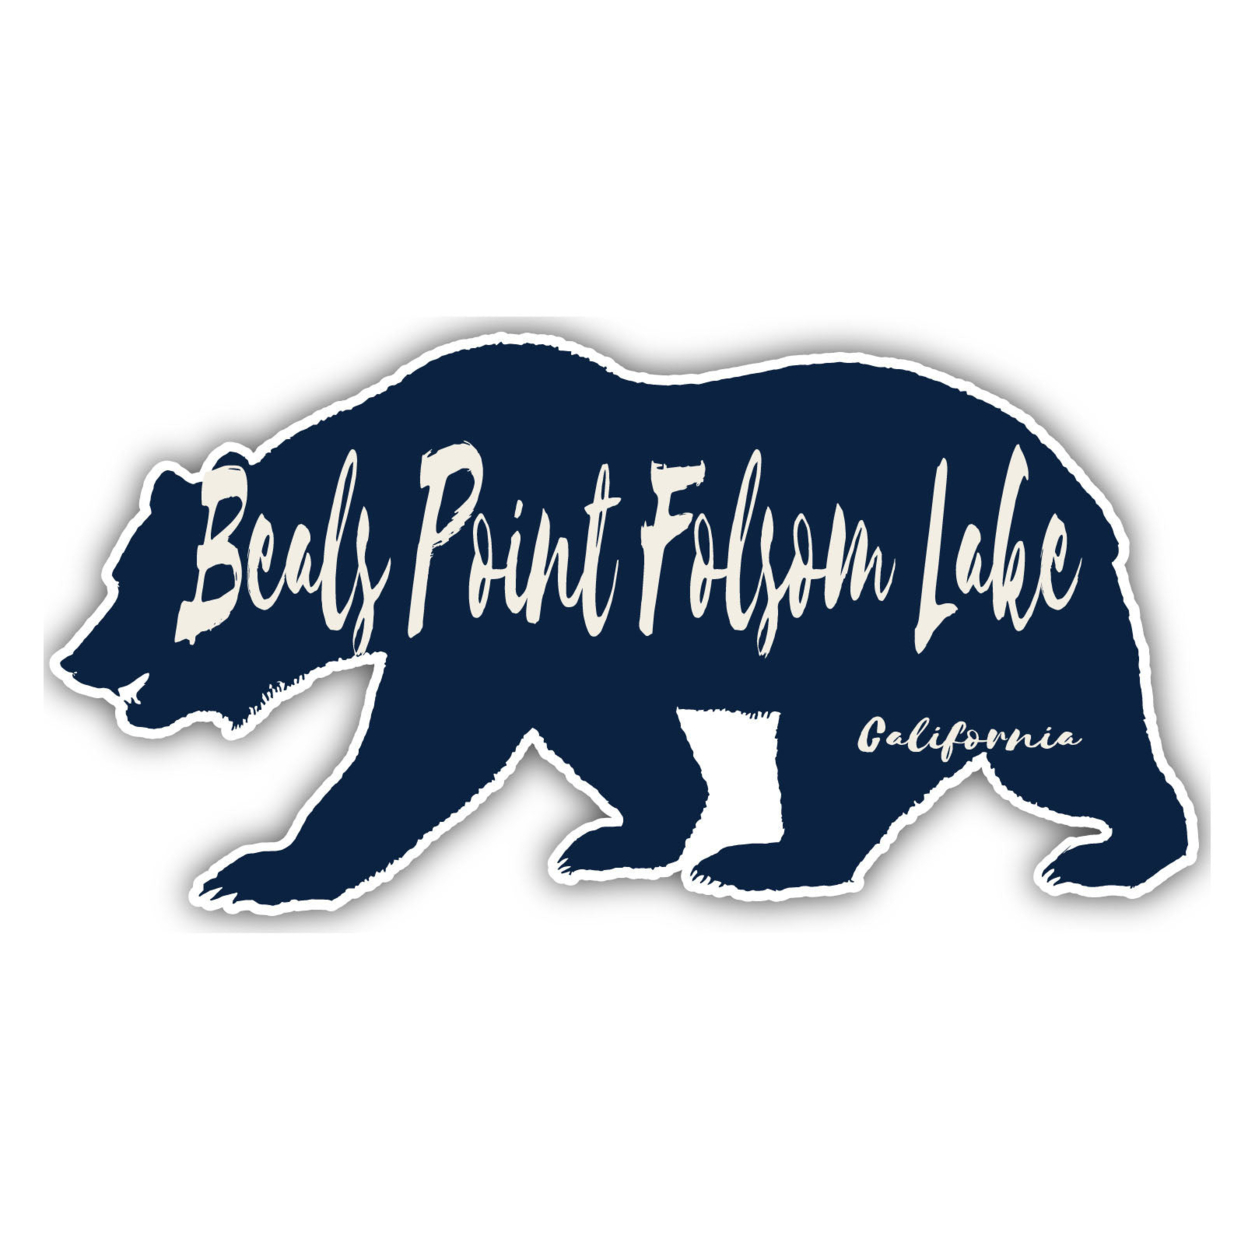 Beals Point Folsom Lake California Souvenir Decorative Stickers (Choose Theme And Size) - 4-Pack, 8-Inch, Bear